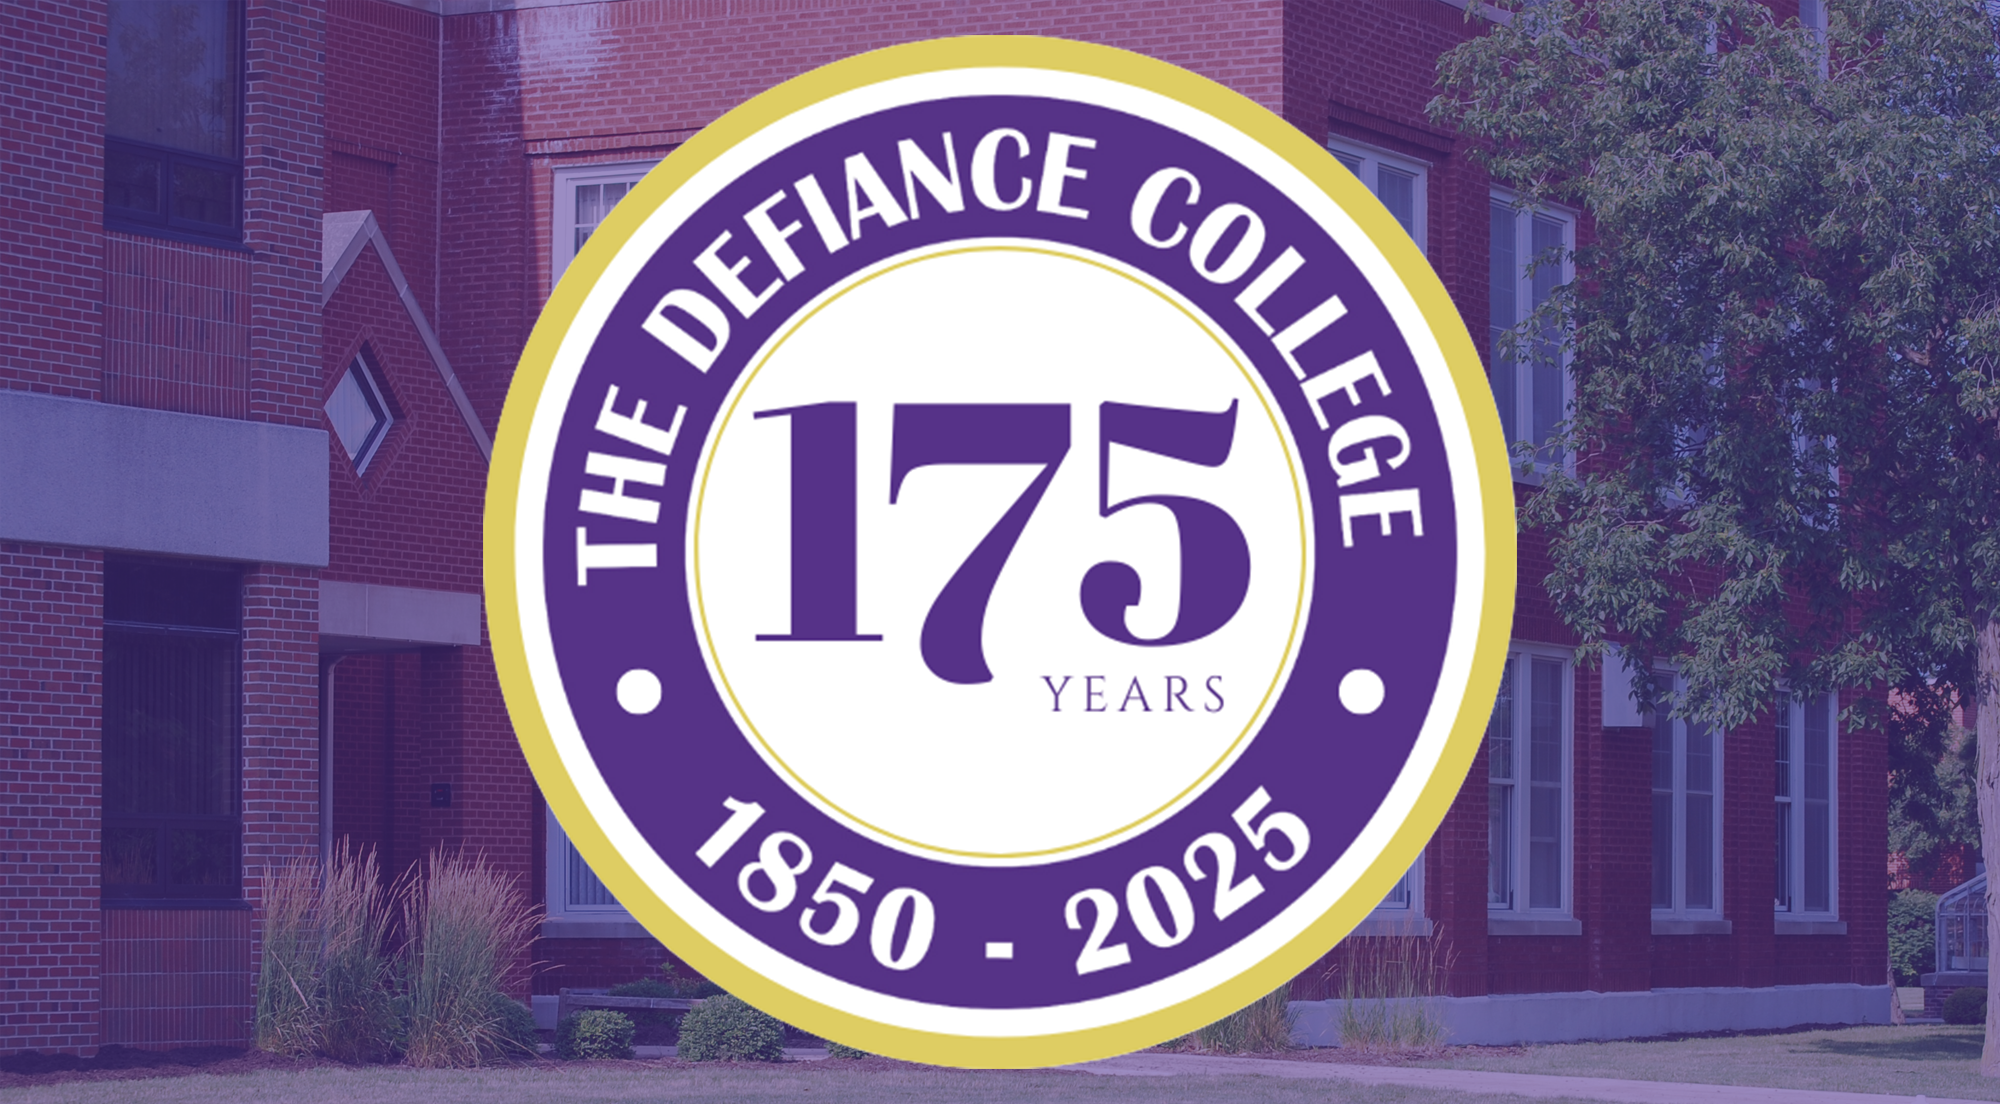 classroom building image with 175th anniversary logo in front of it